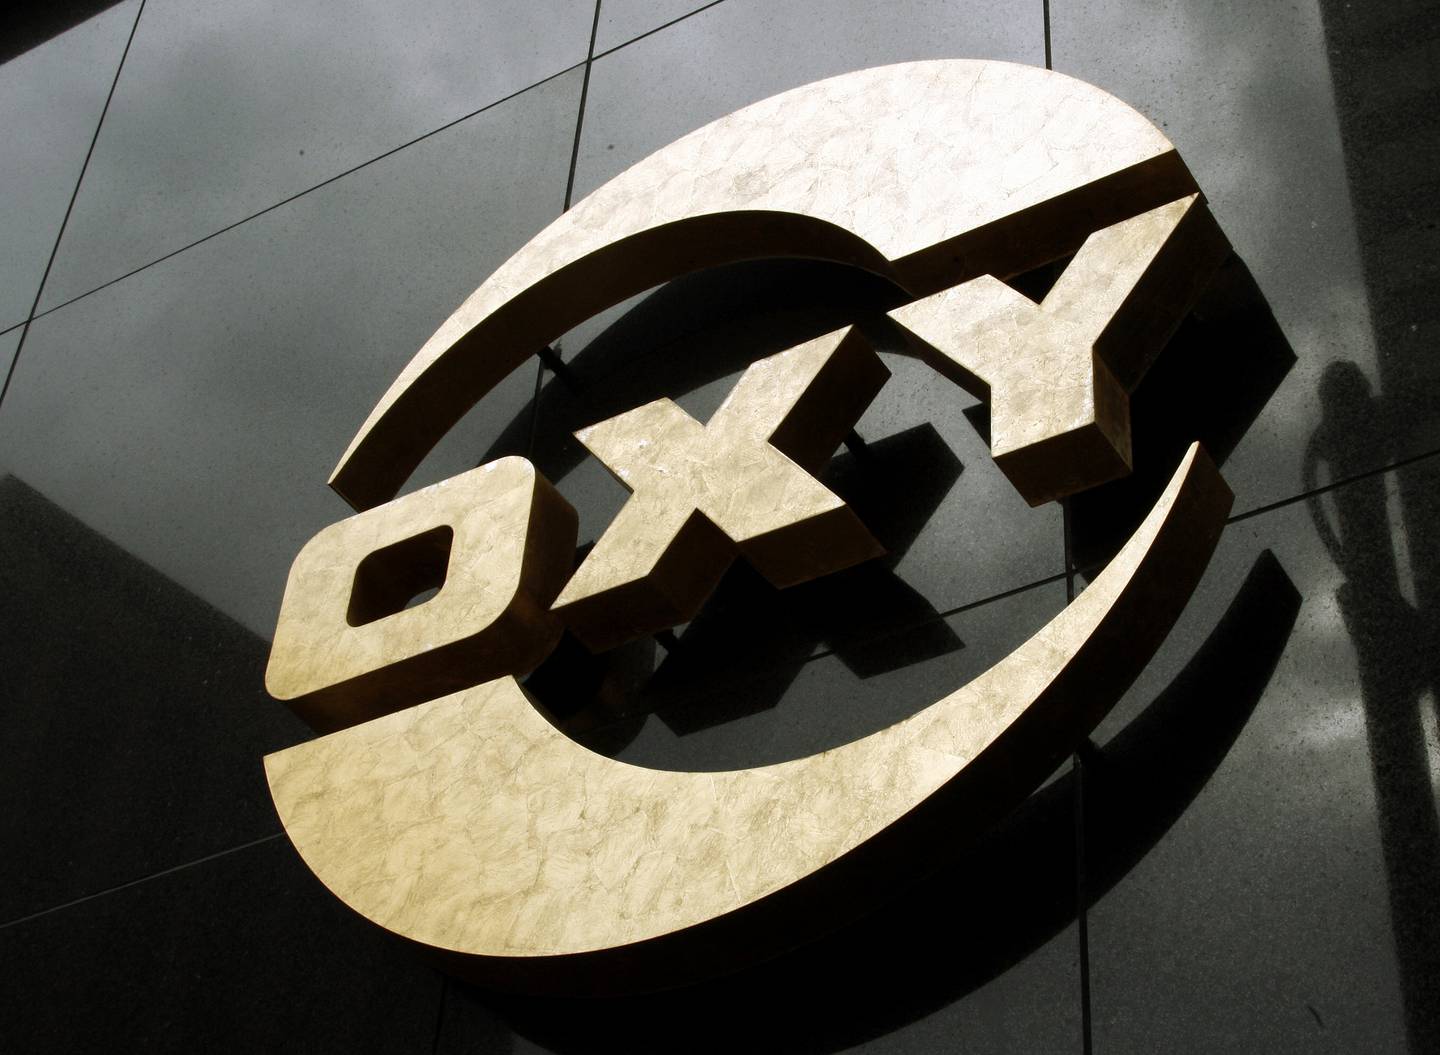 Occidental is the best-performing stock in the S&P 500 this year, rising 146 per cent as the index declined 11 per cent, driven by Warren Buffett’s steady buying and high oil prices. AP